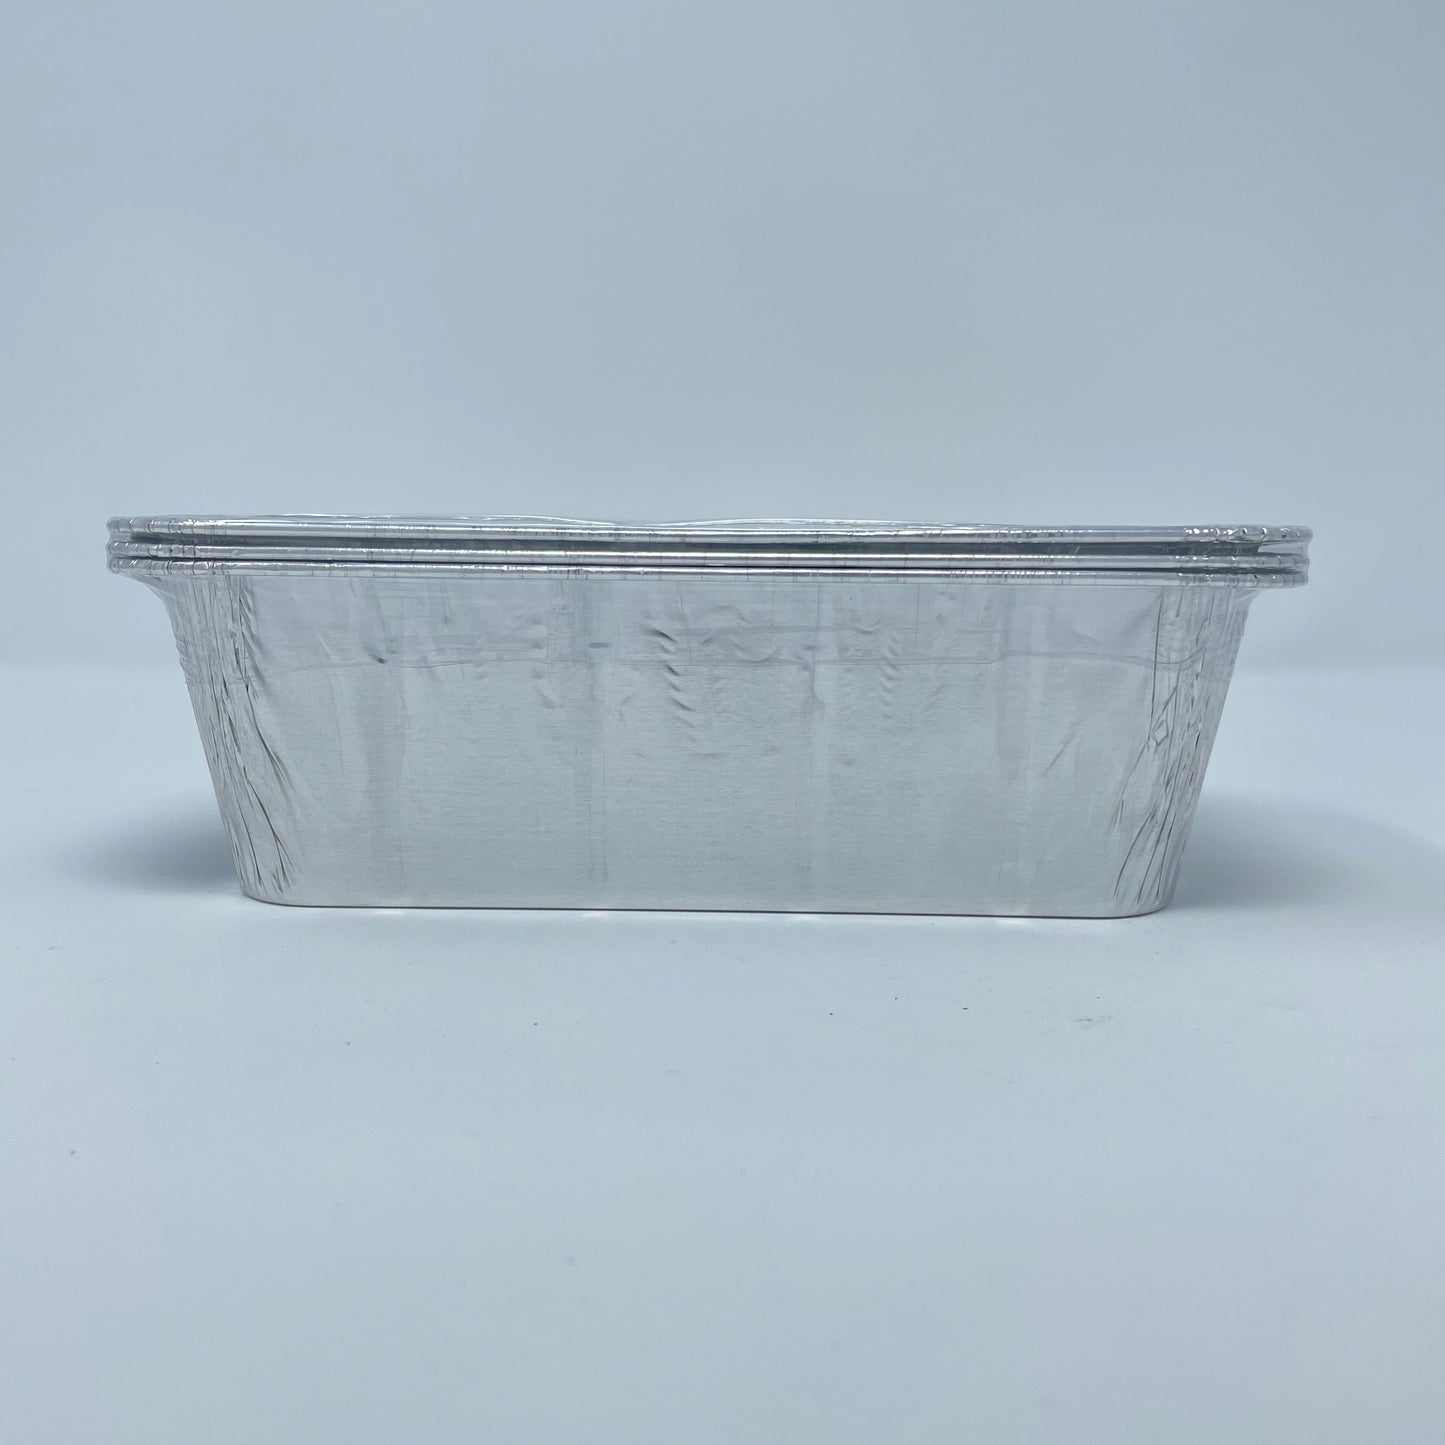 Loaf Pan, Large (3 units/pack, 8.66" x 4.75" x 2.375")